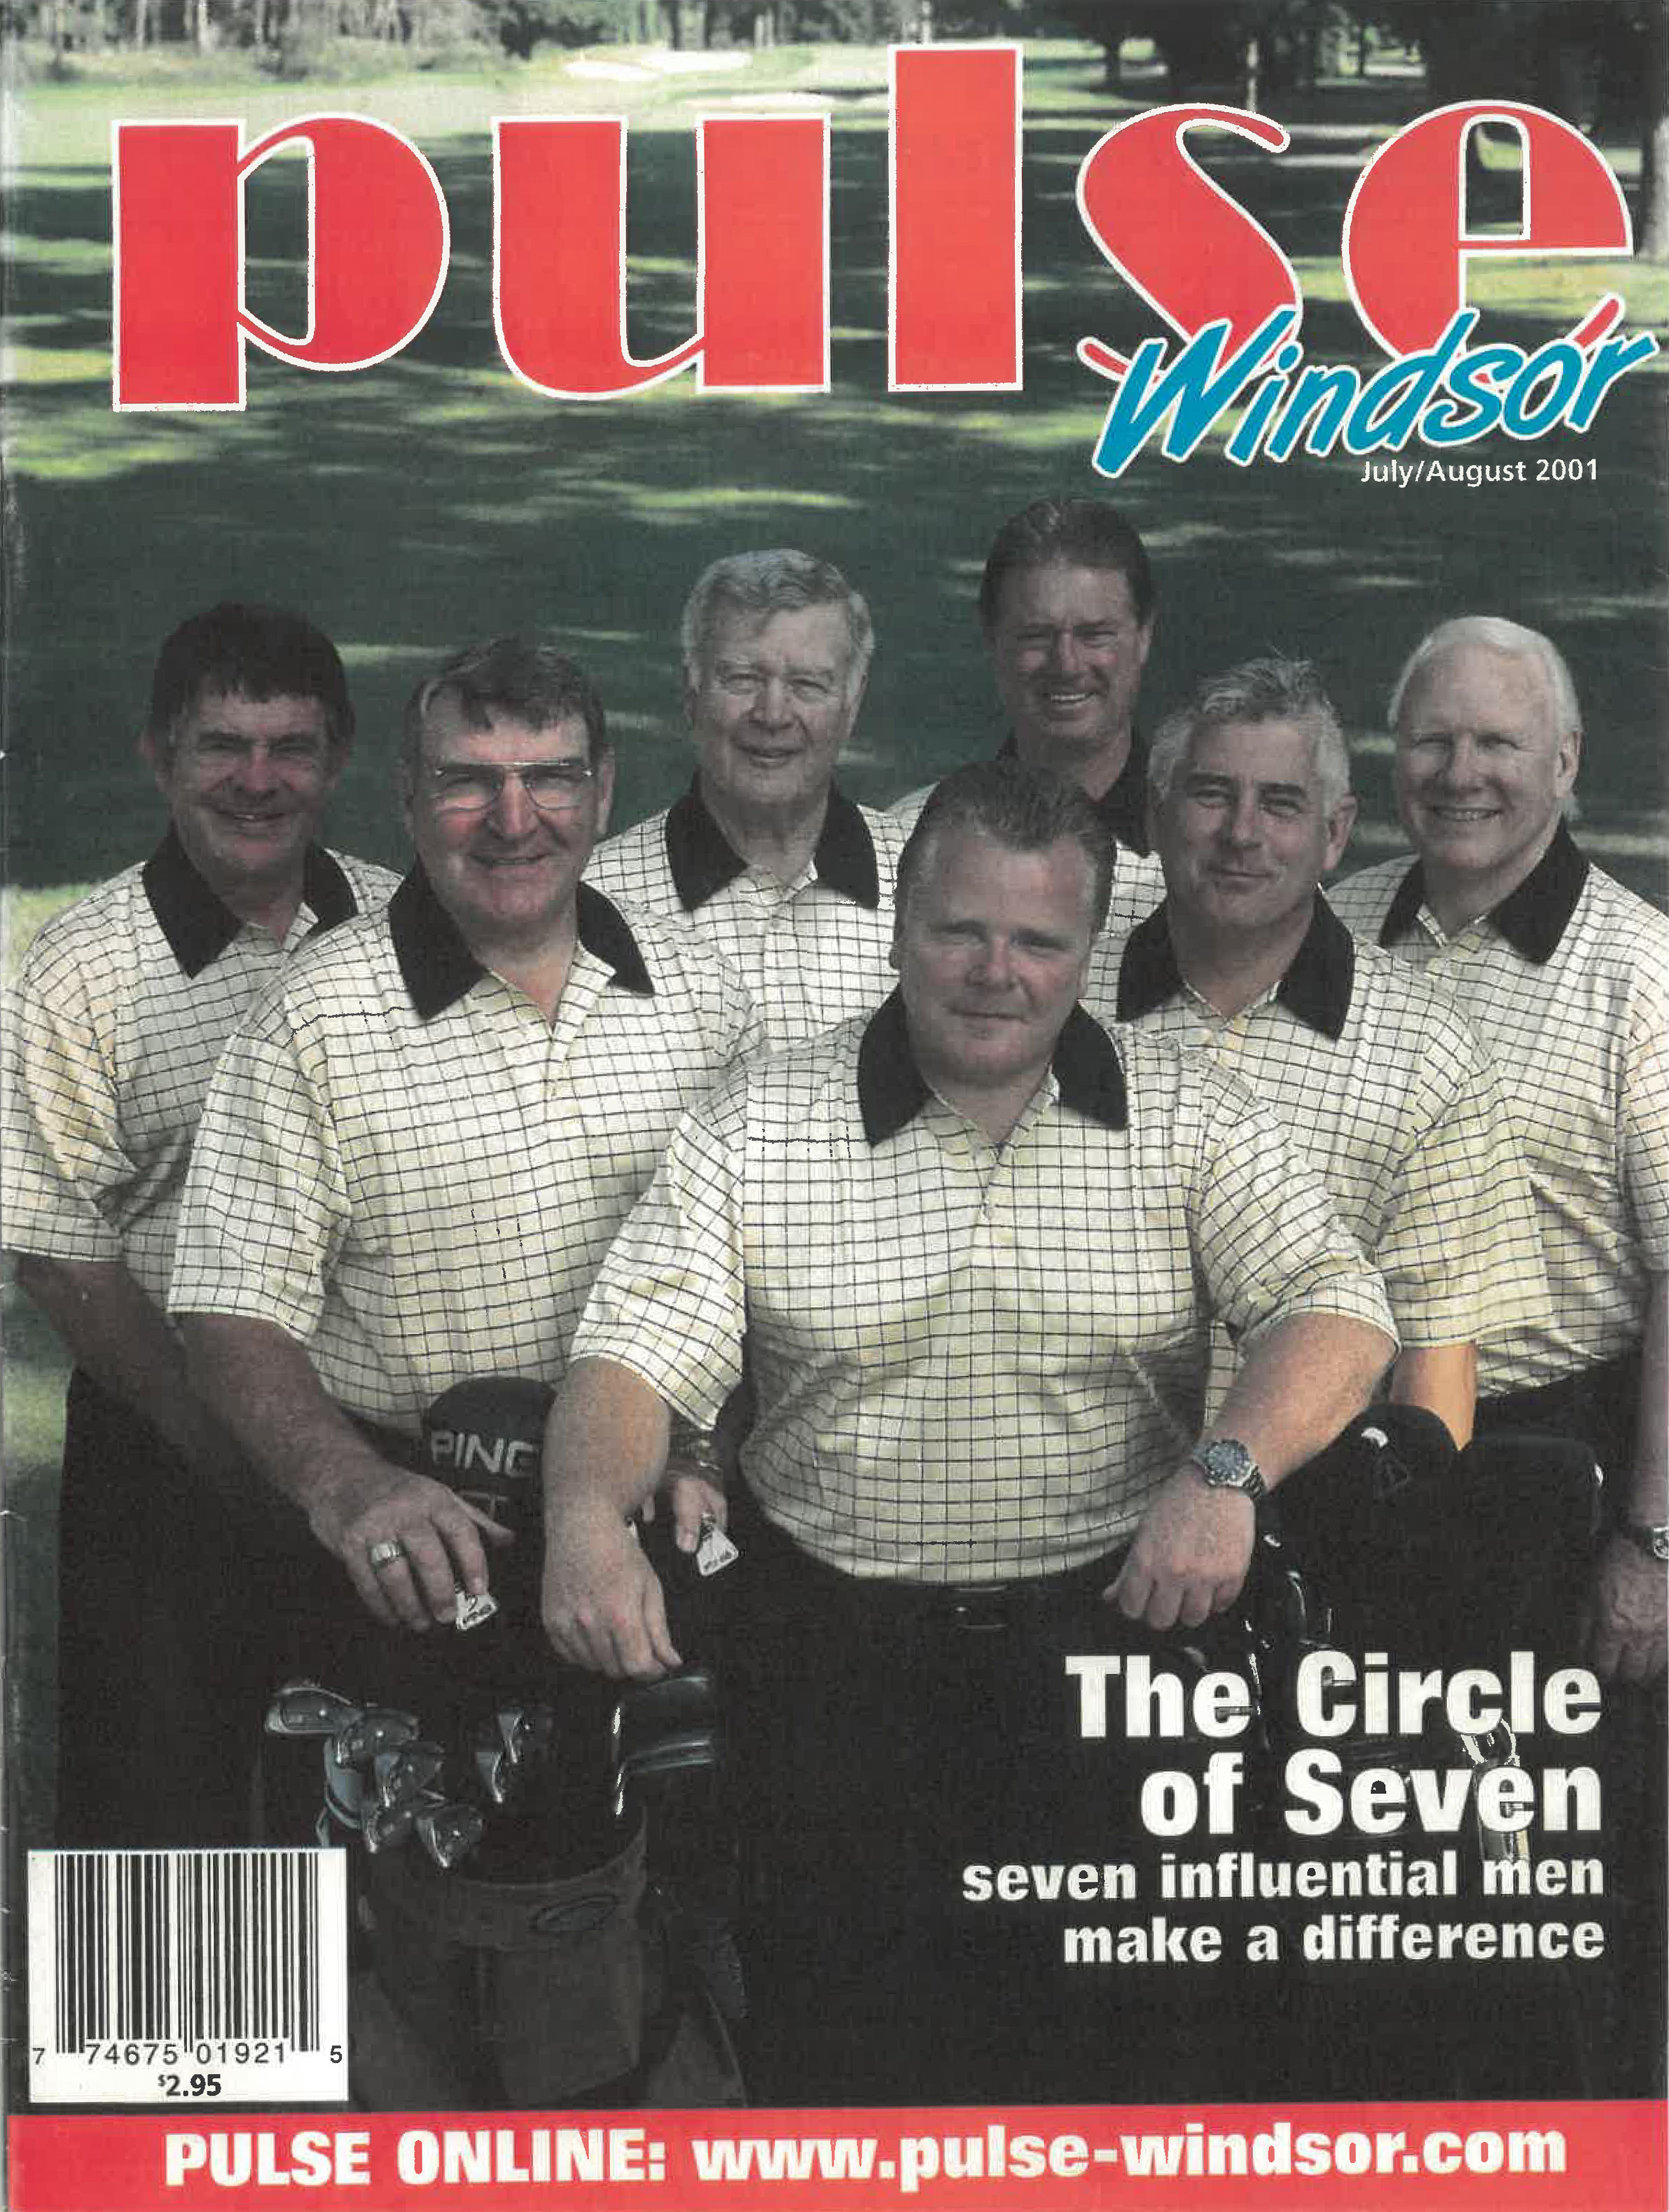 Cover of Pulse Windsor July/August 2001 | The Circle of Seven | Seven Influencial men make a difference